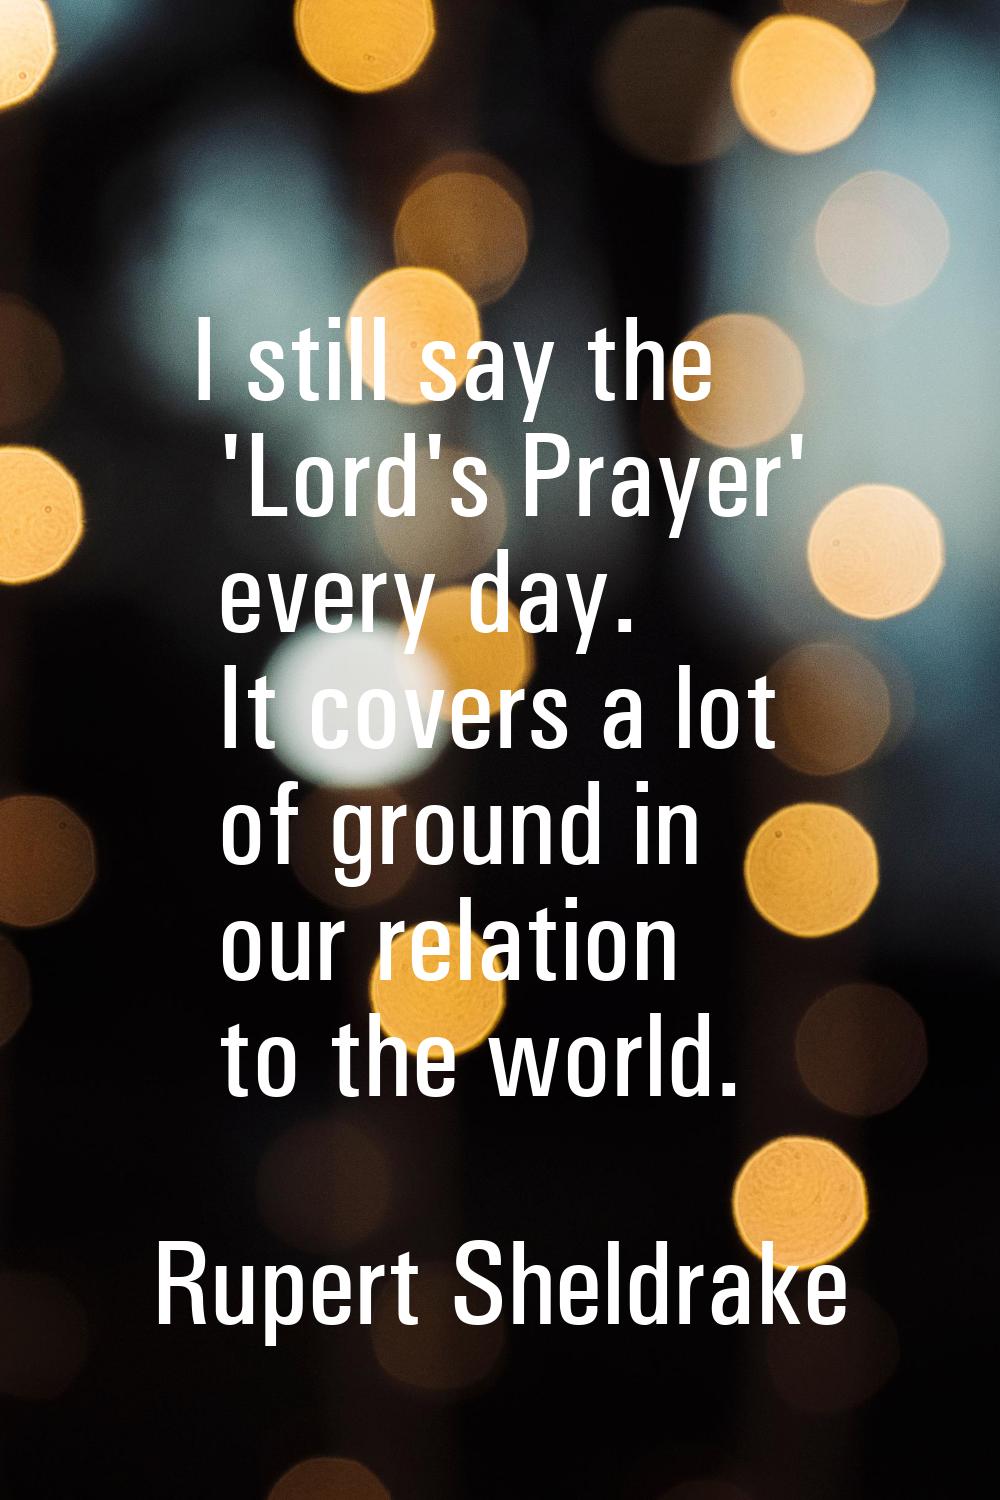 I still say the 'Lord's Prayer' every day. It covers a lot of ground in our relation to the world.